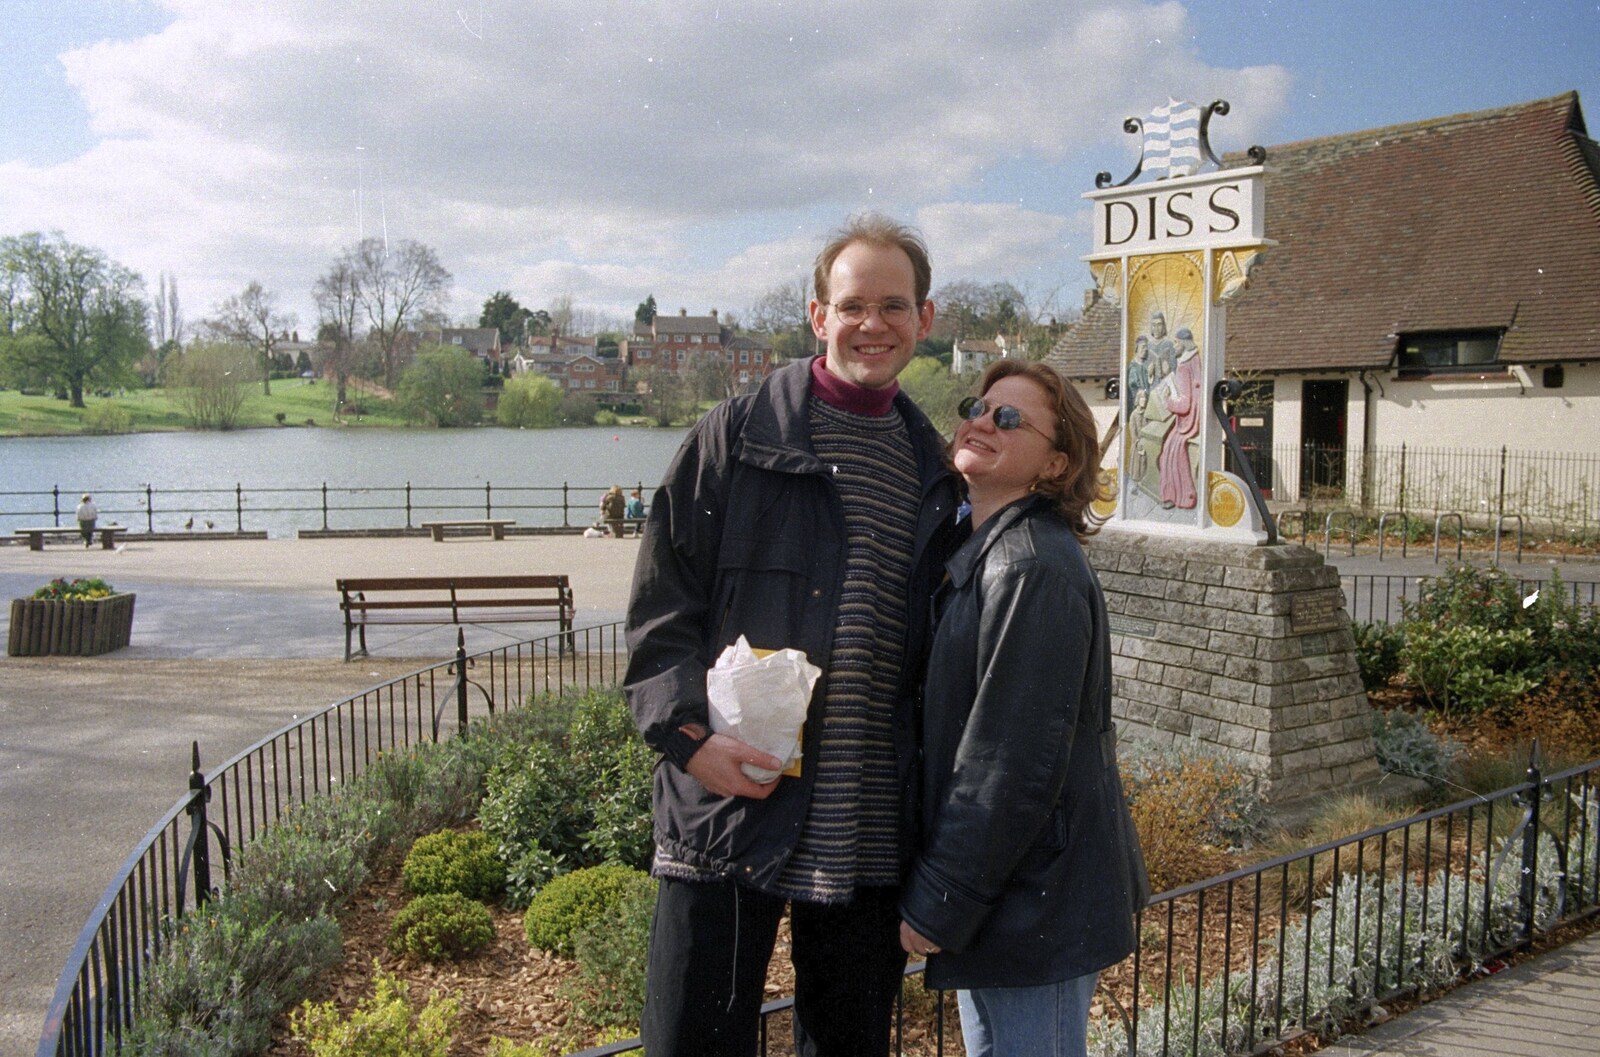 Phil and Lolly by the town sign in Diss from A Phil and Sean Weekend, and Bedroom Building, Brome, Norwich and Southwold - 18th April 1995